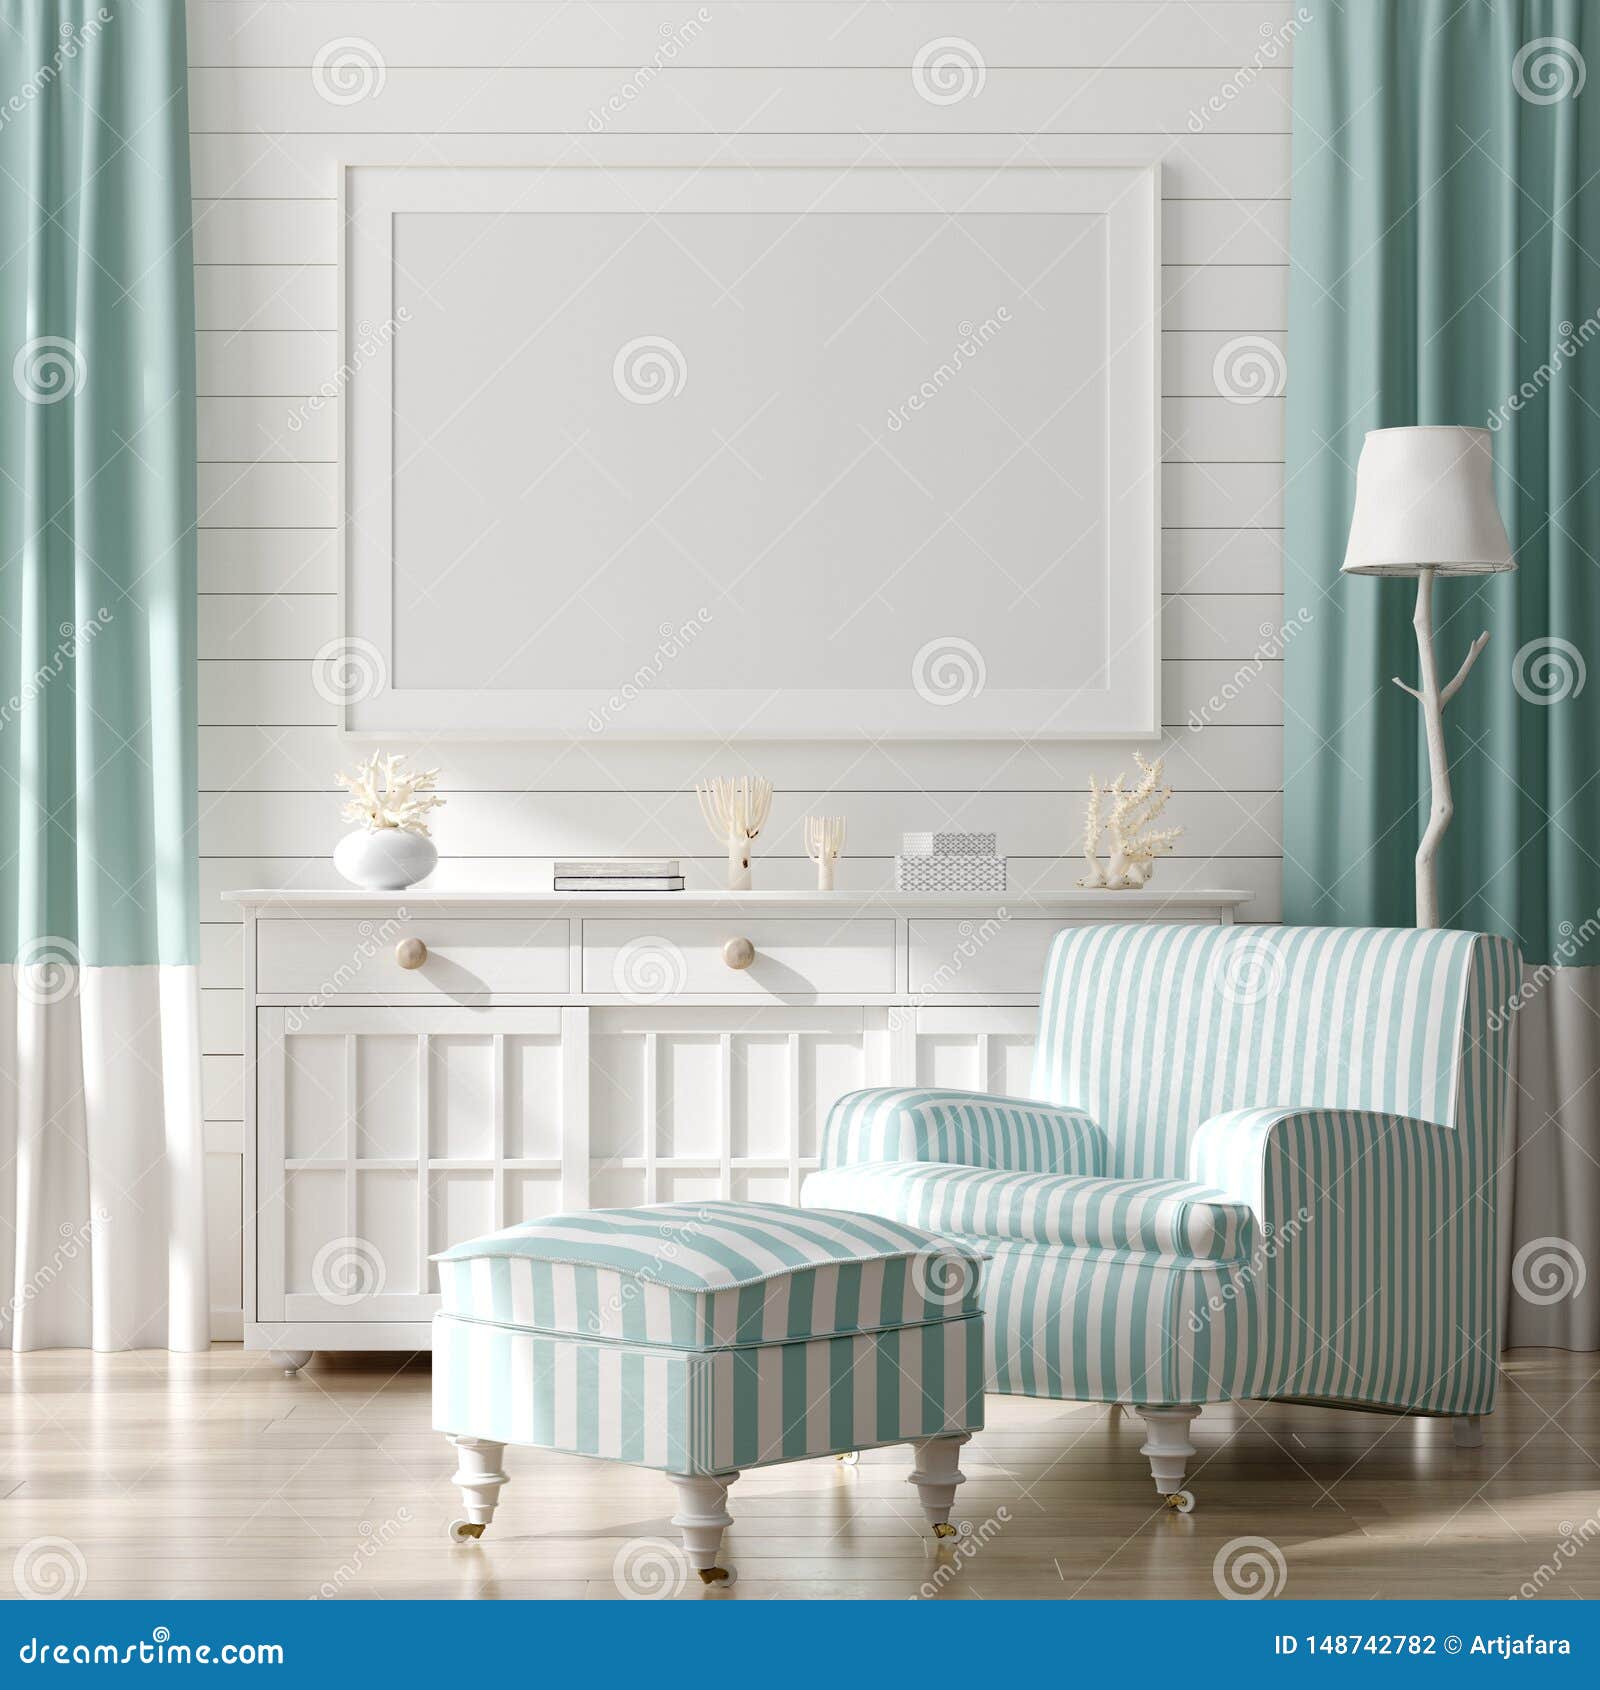 mock up frame in home interior background, coastal style living room with marine decor.